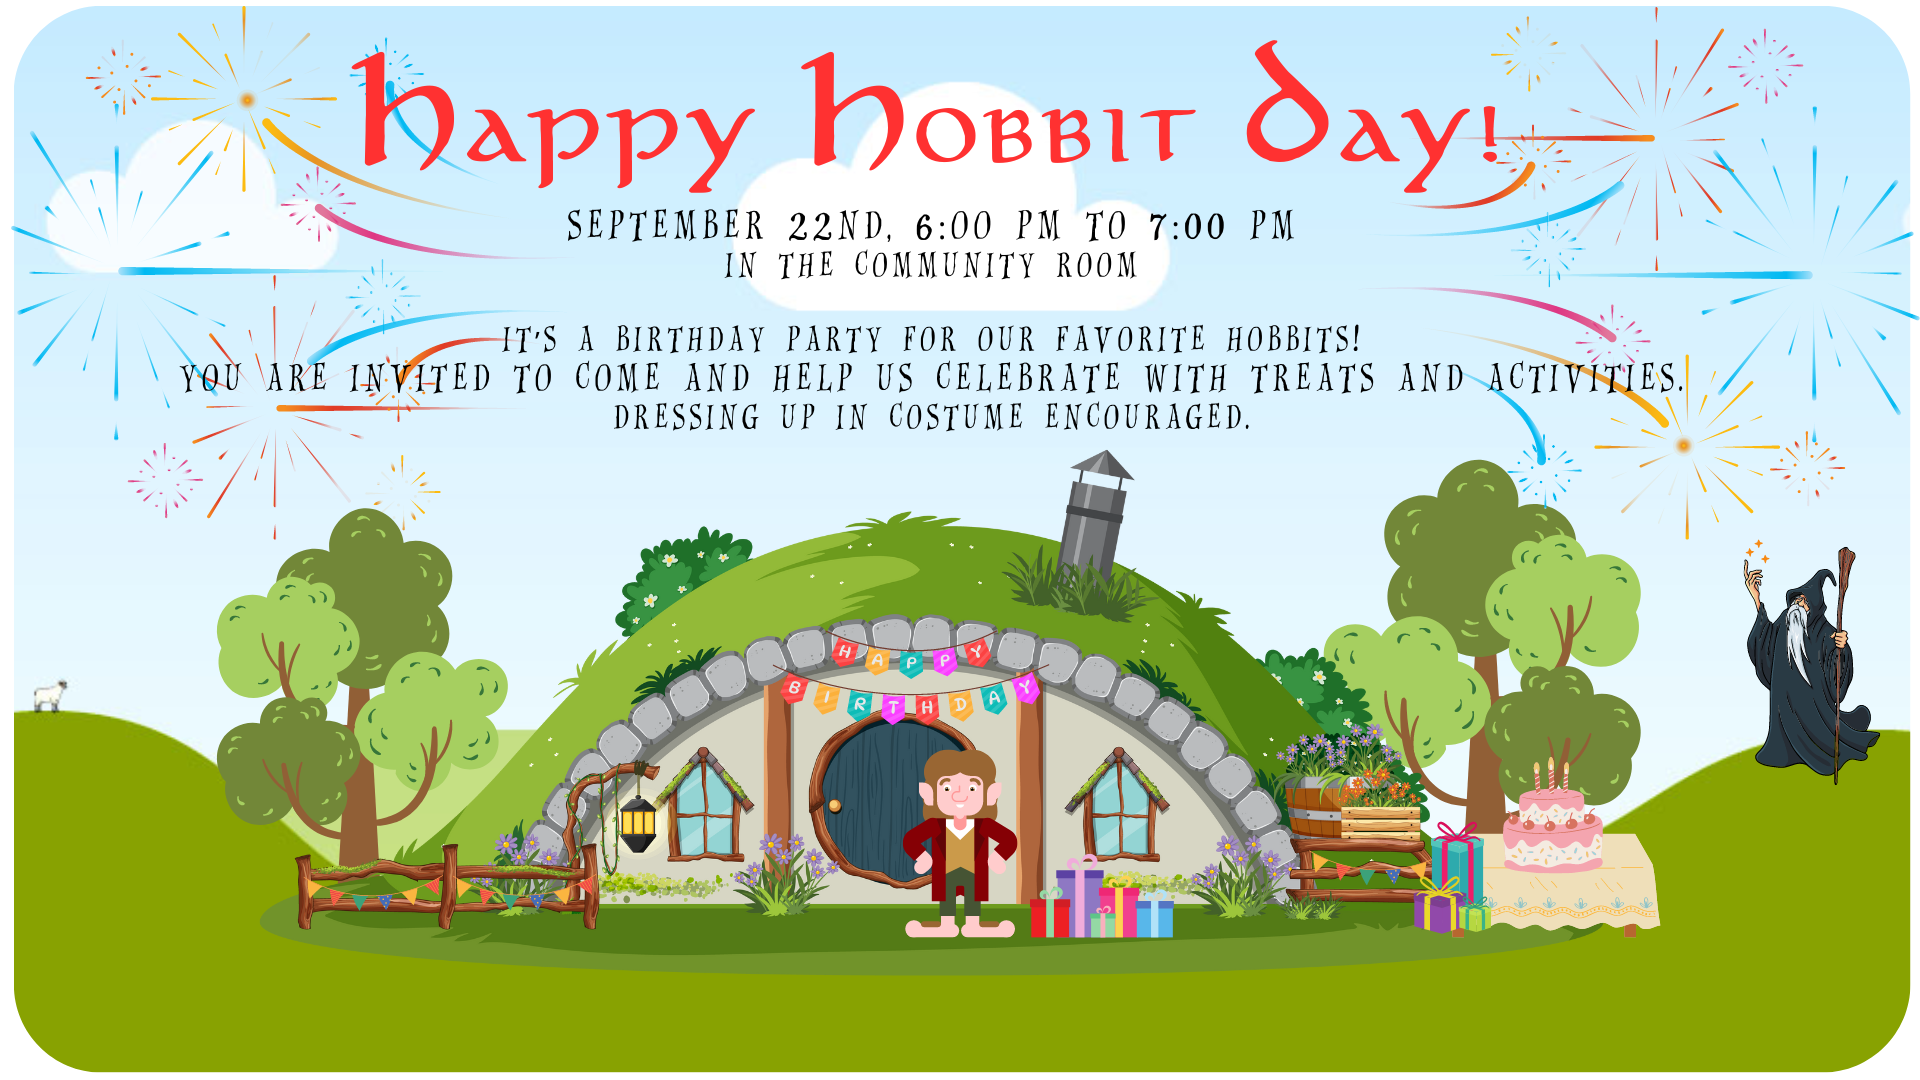 A flyer for a hobit birthday party celebration at the Billings Public Library on September 22nd at 6:00pm